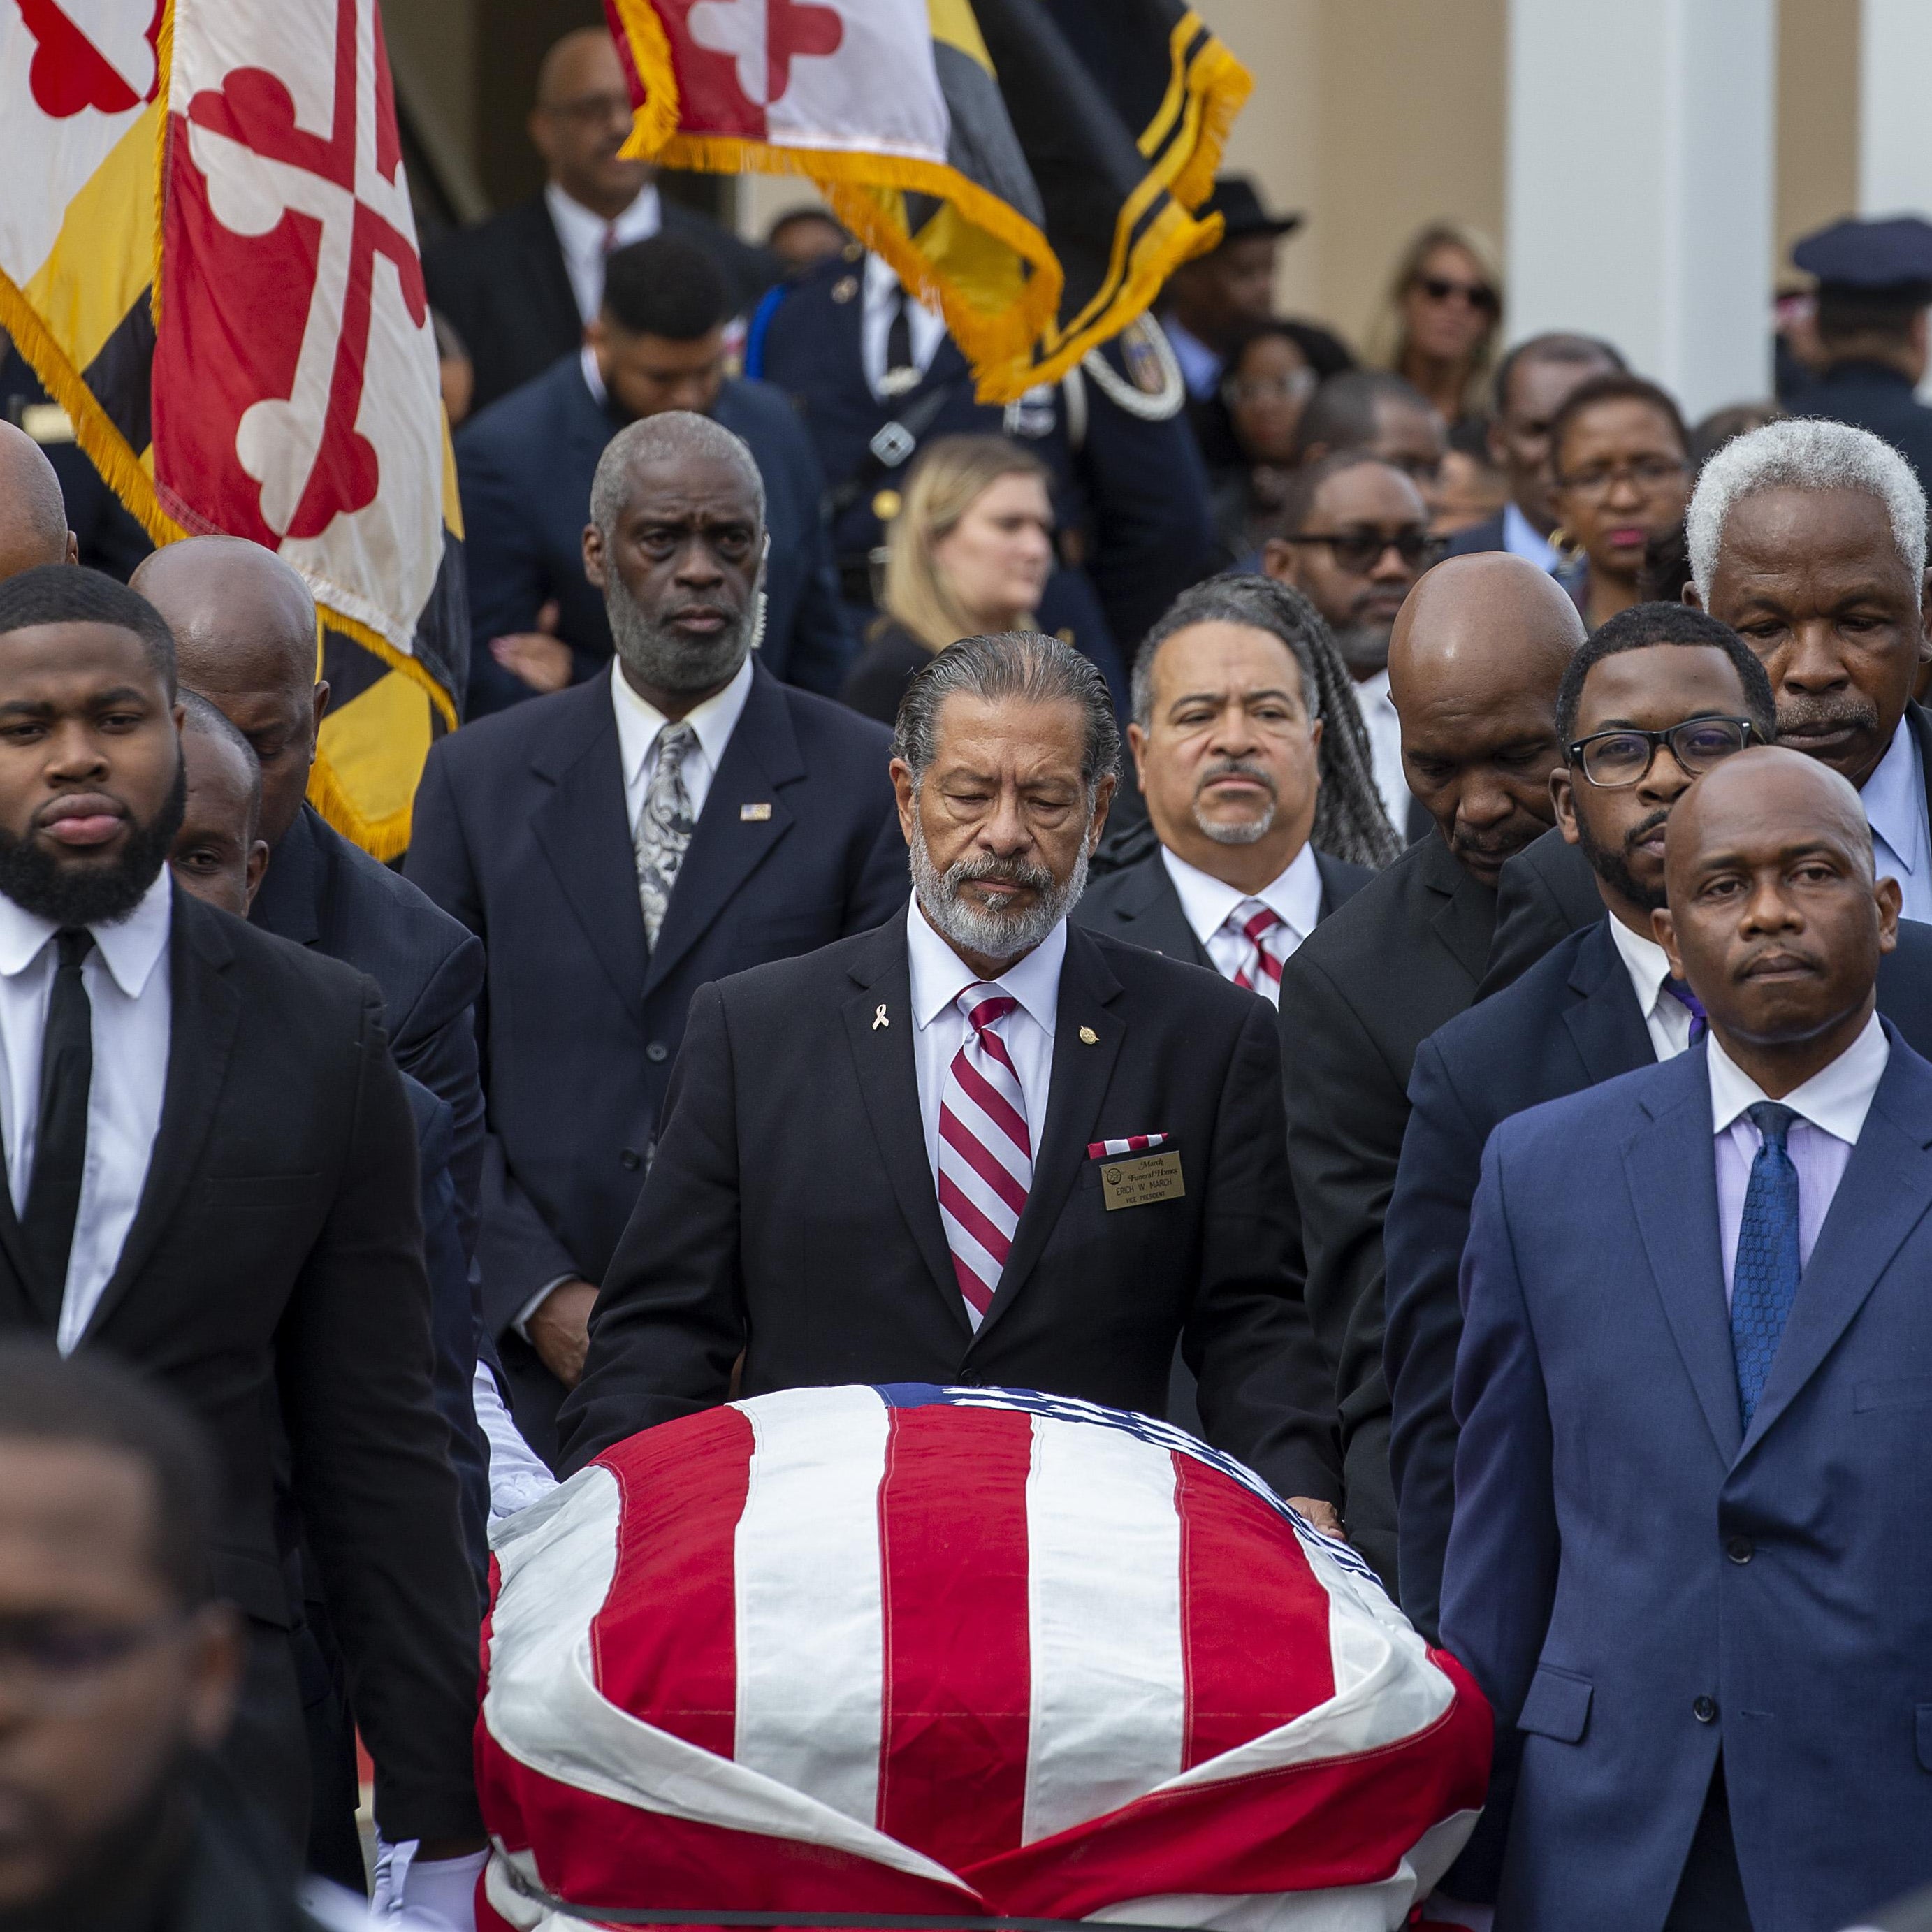 The casket of Rep. Elijah Cummings (D-MD) is taken out of New Psalmist Baptist Church following his funeral service.